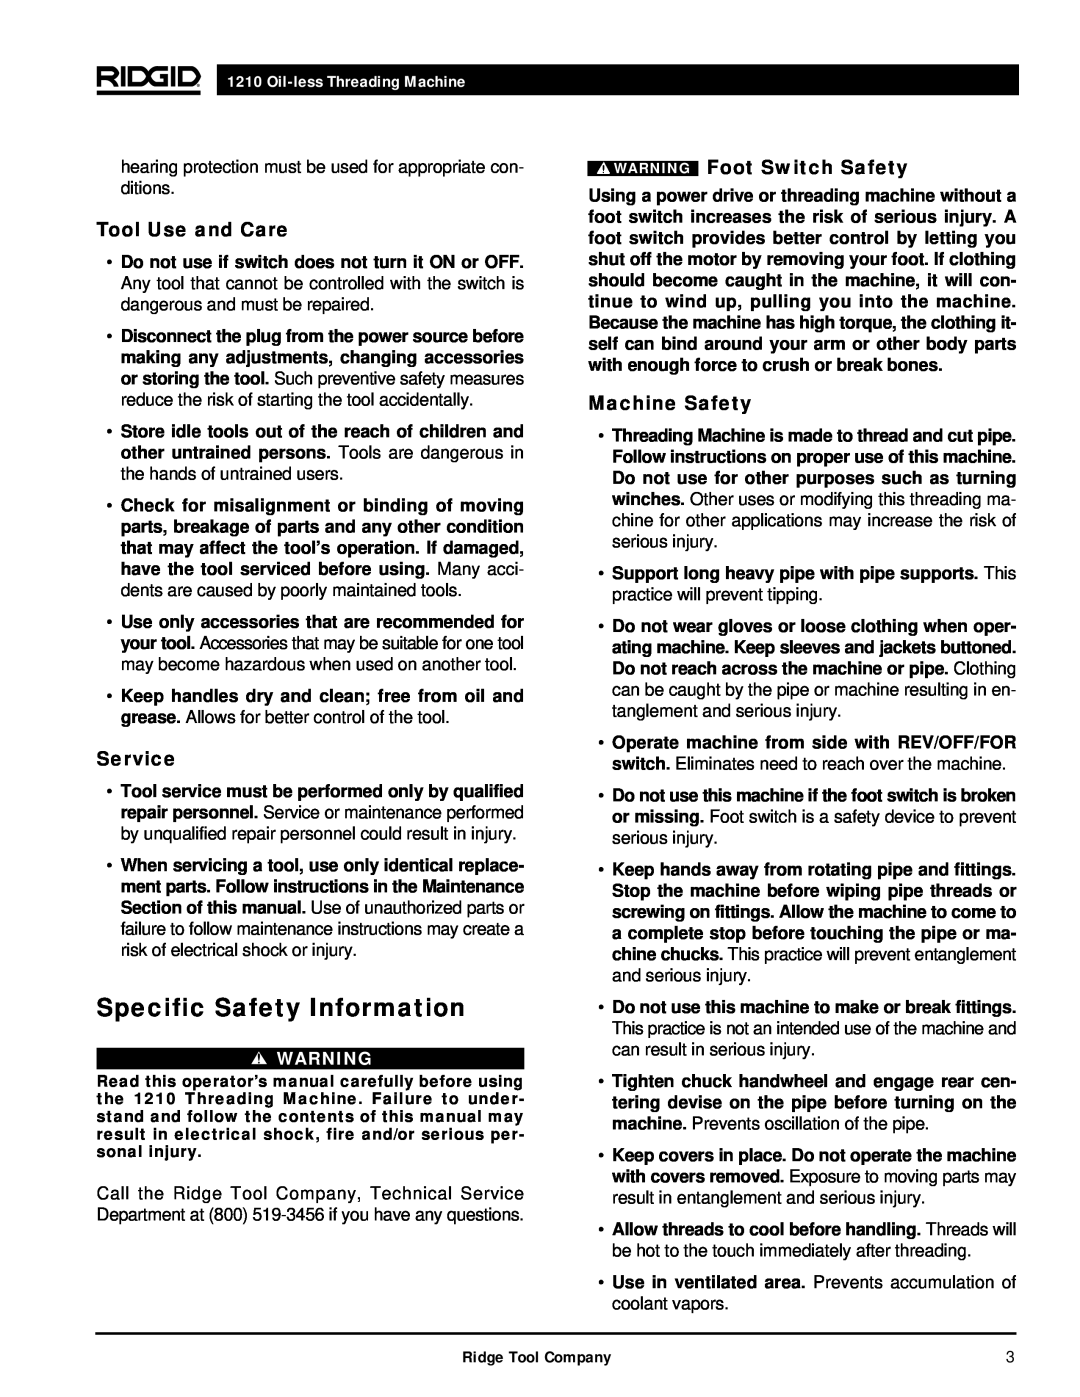 RIDGID 1210 manual Specific Safety Information, Tool Use and Care, Service, WARNING Foot Switch Safety, Machine Safety 